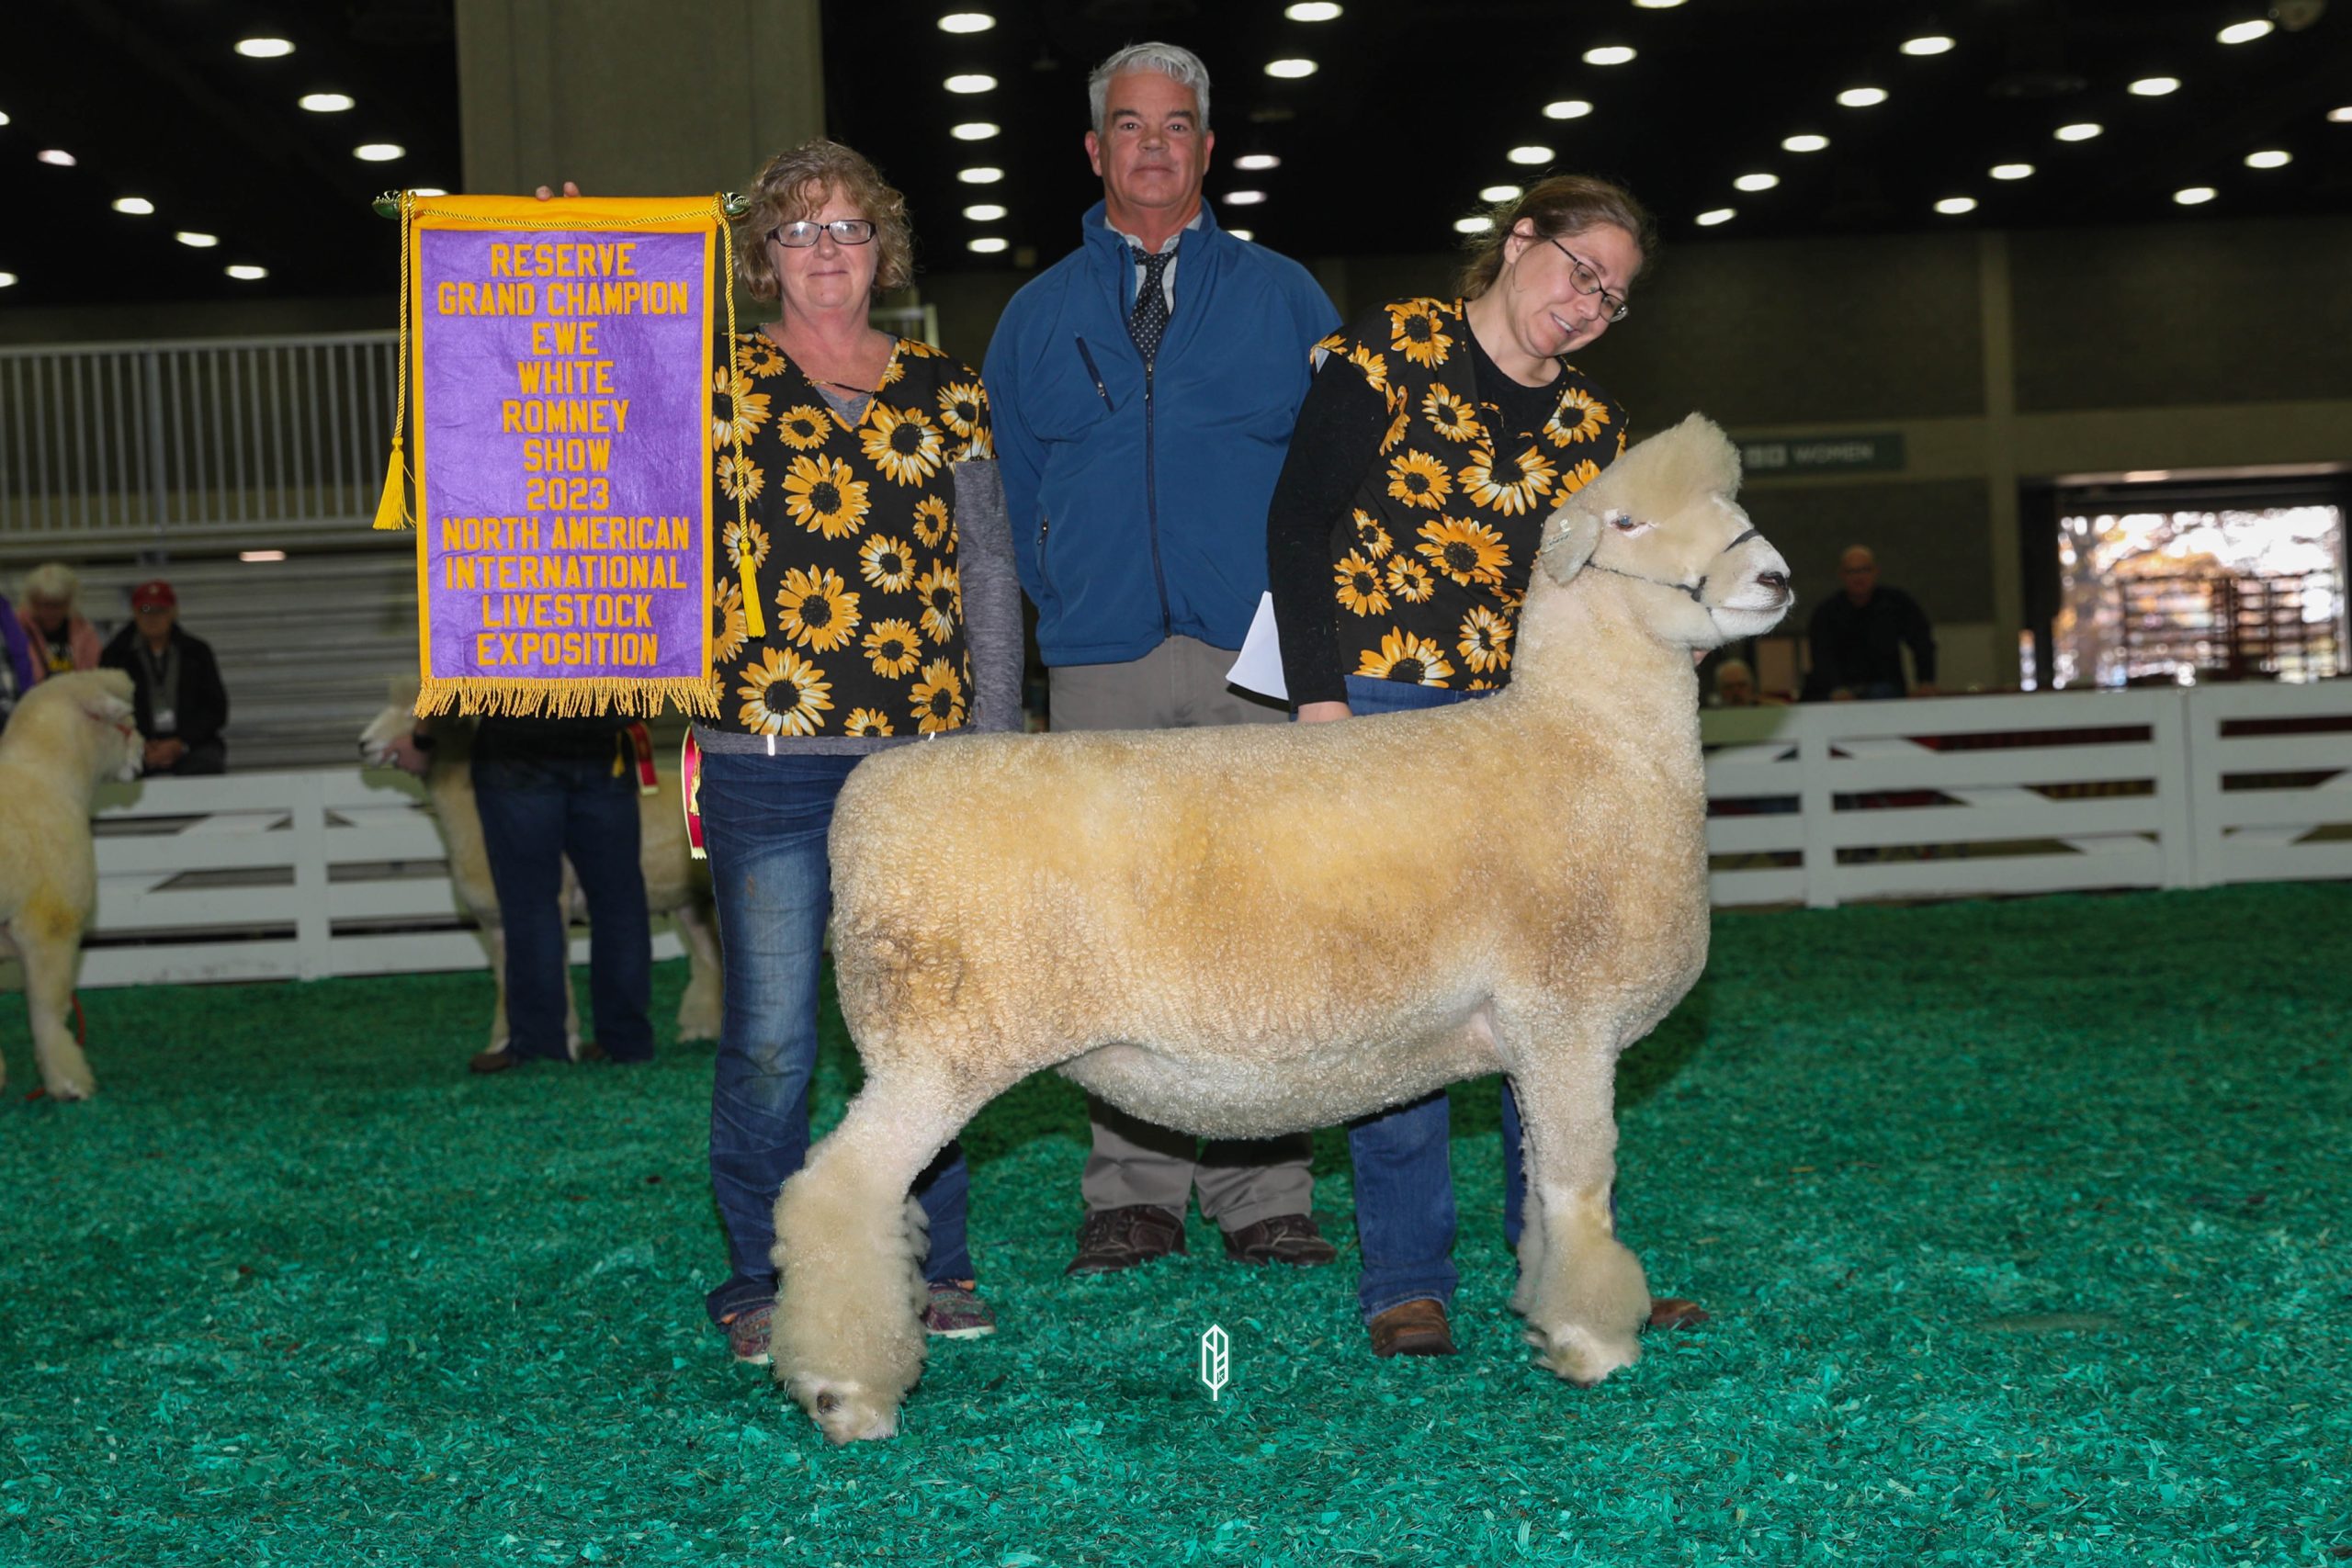 2023 National White Romney Show at NAILE
Reserve Champion White Ewe exhibited by Emma Rogers